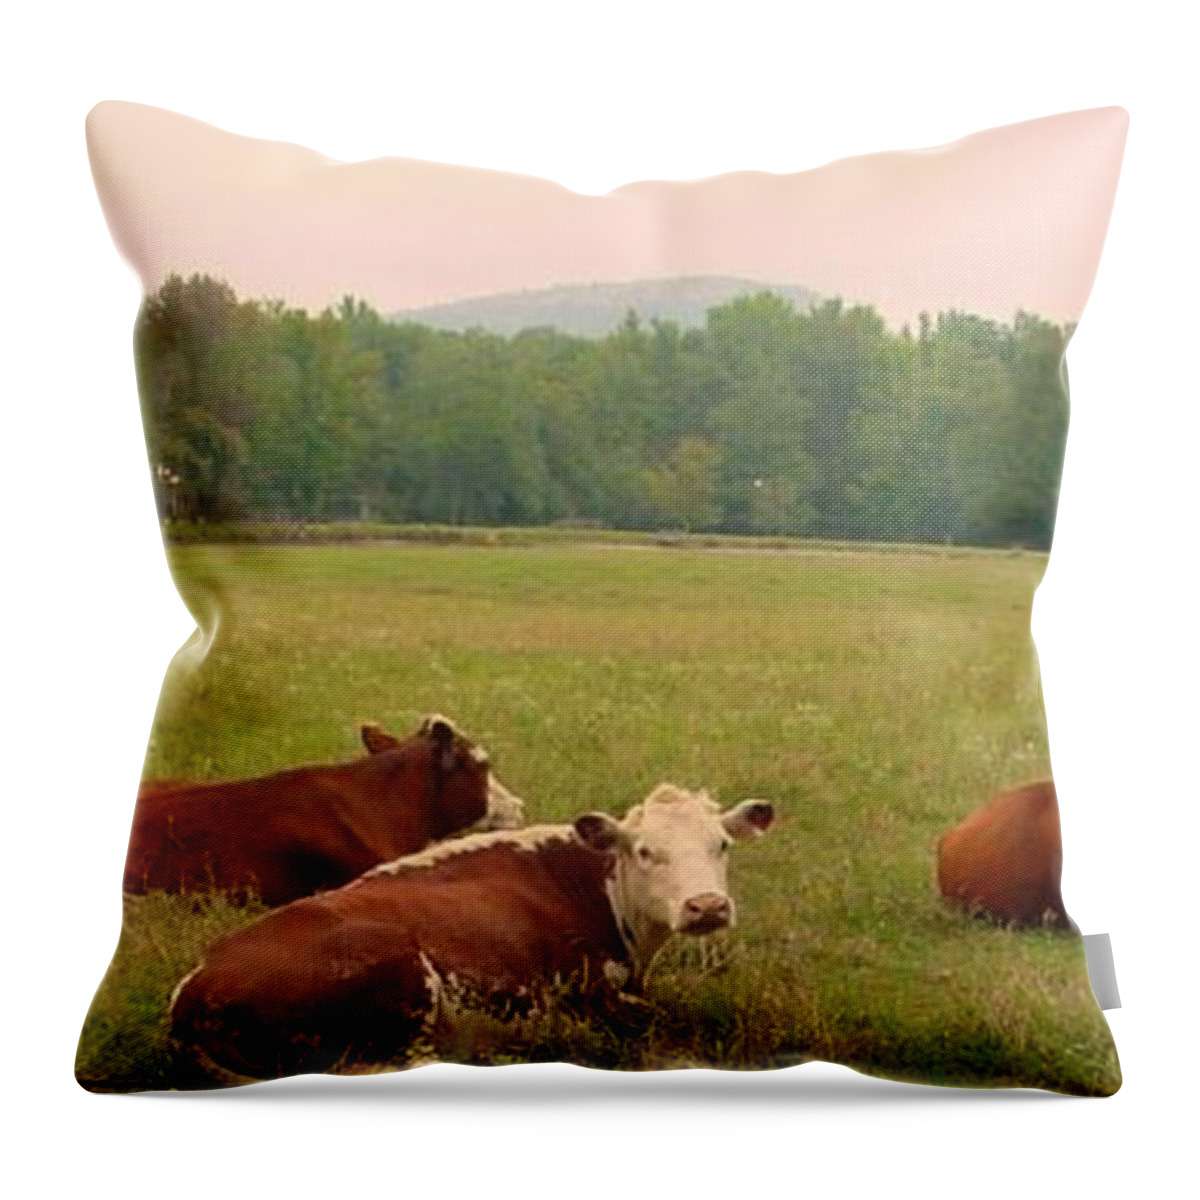 Cow Throw Pillow featuring the photograph A Leisurely Afternoon by Kathy Bucari